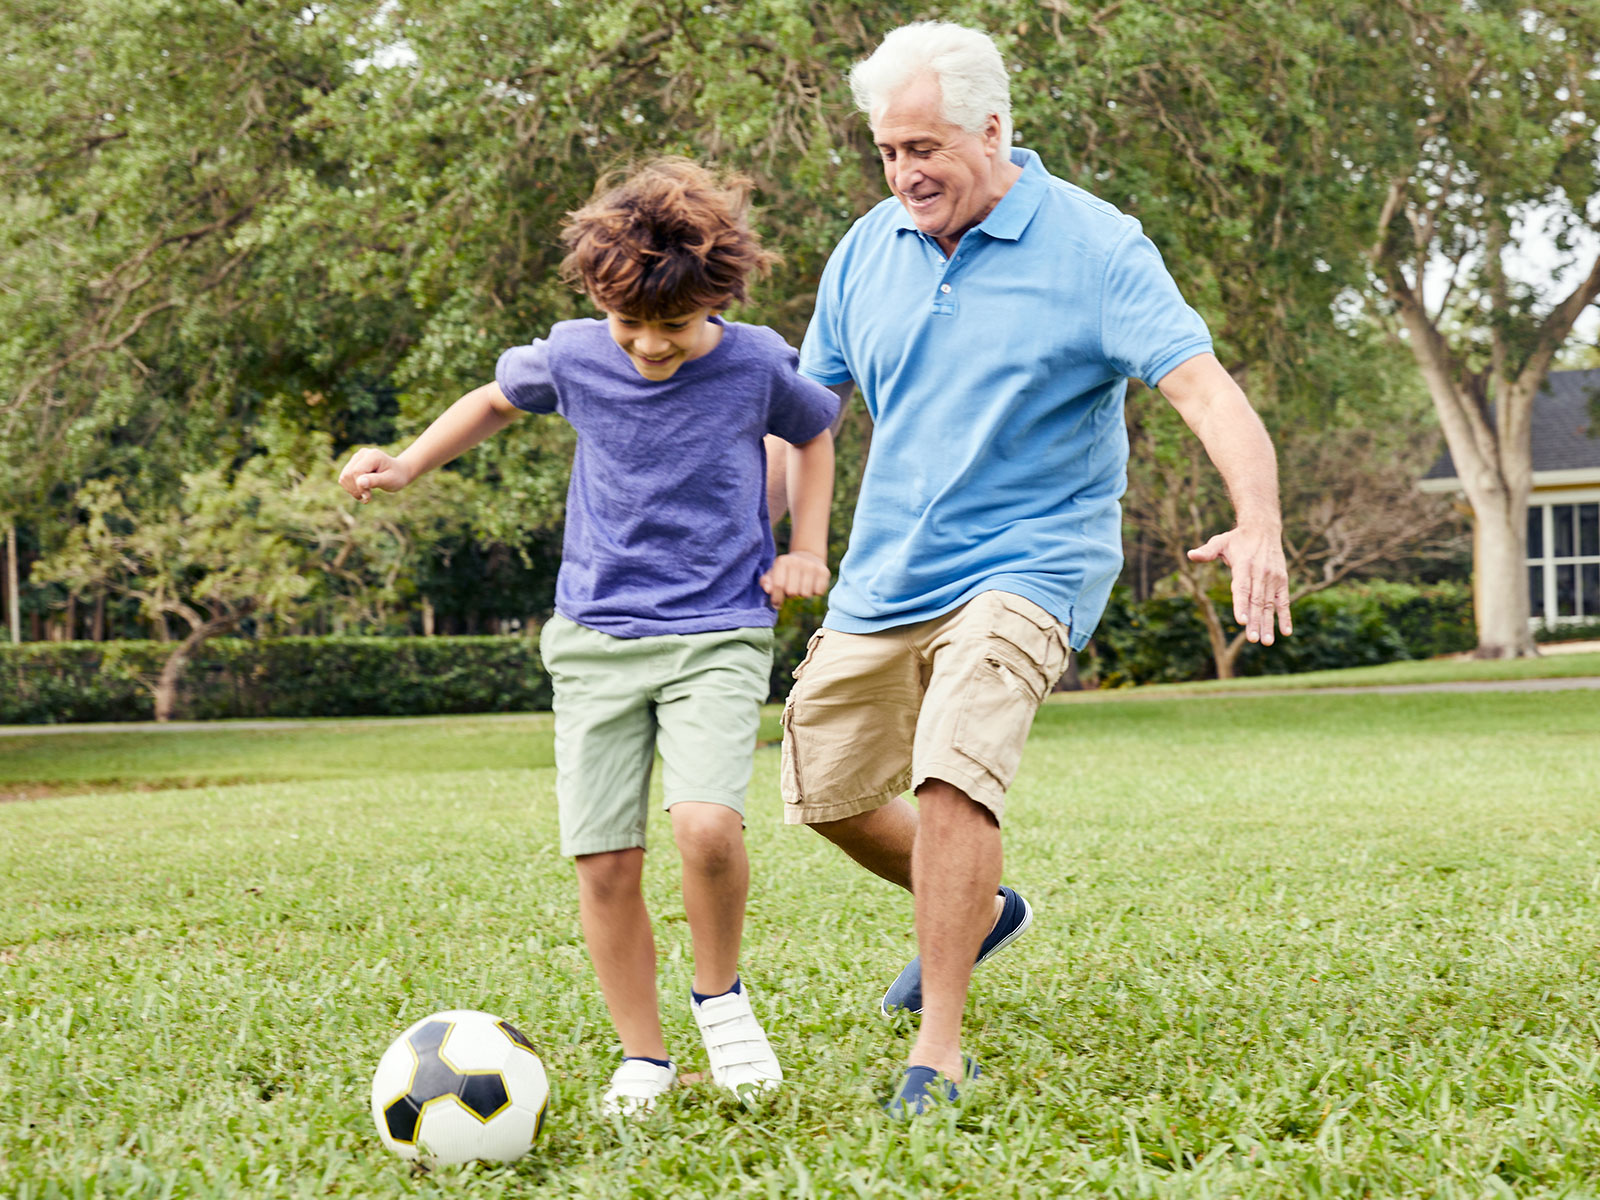 Grandfather plays soccer with grandson.